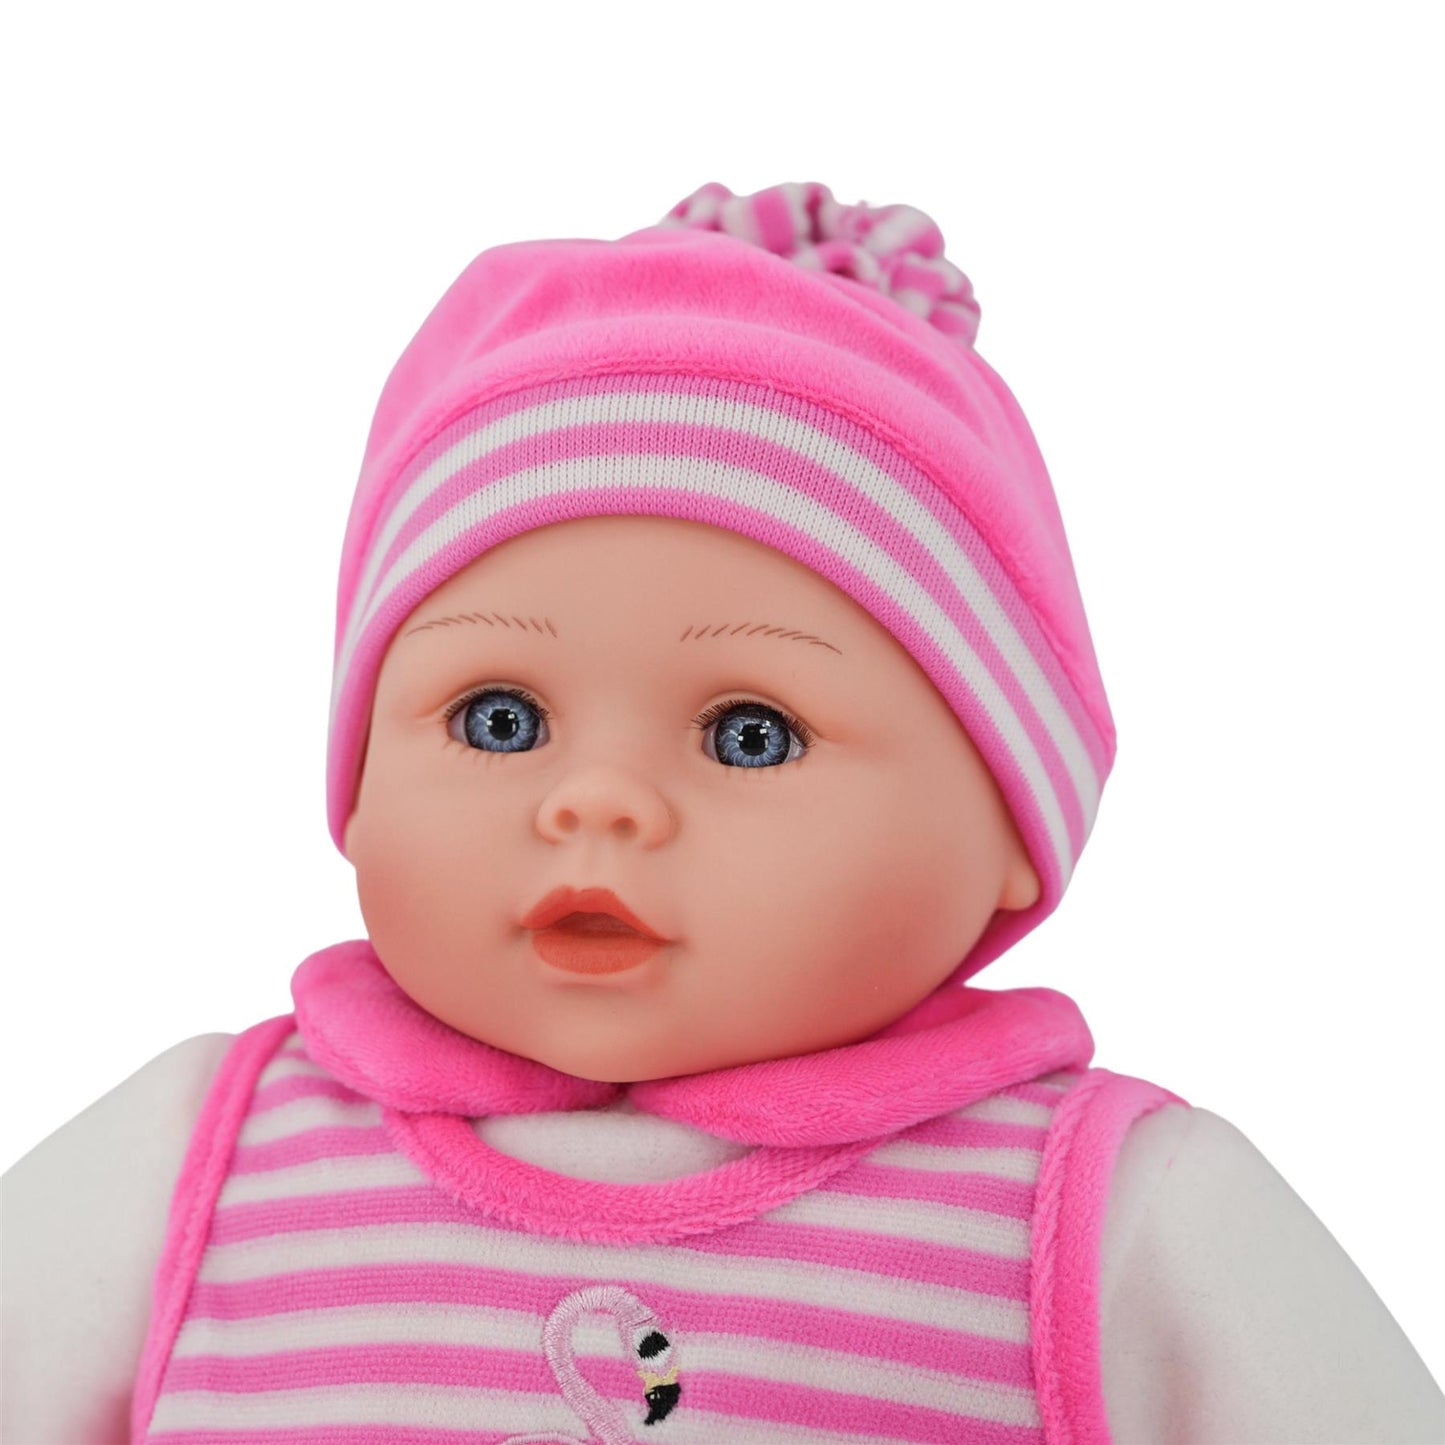 16” Baby Girl Doll With Extra Boy Outfit,Sounds,Feeding Set & Magic Bottle by BiBi Doll - UKBuyZone